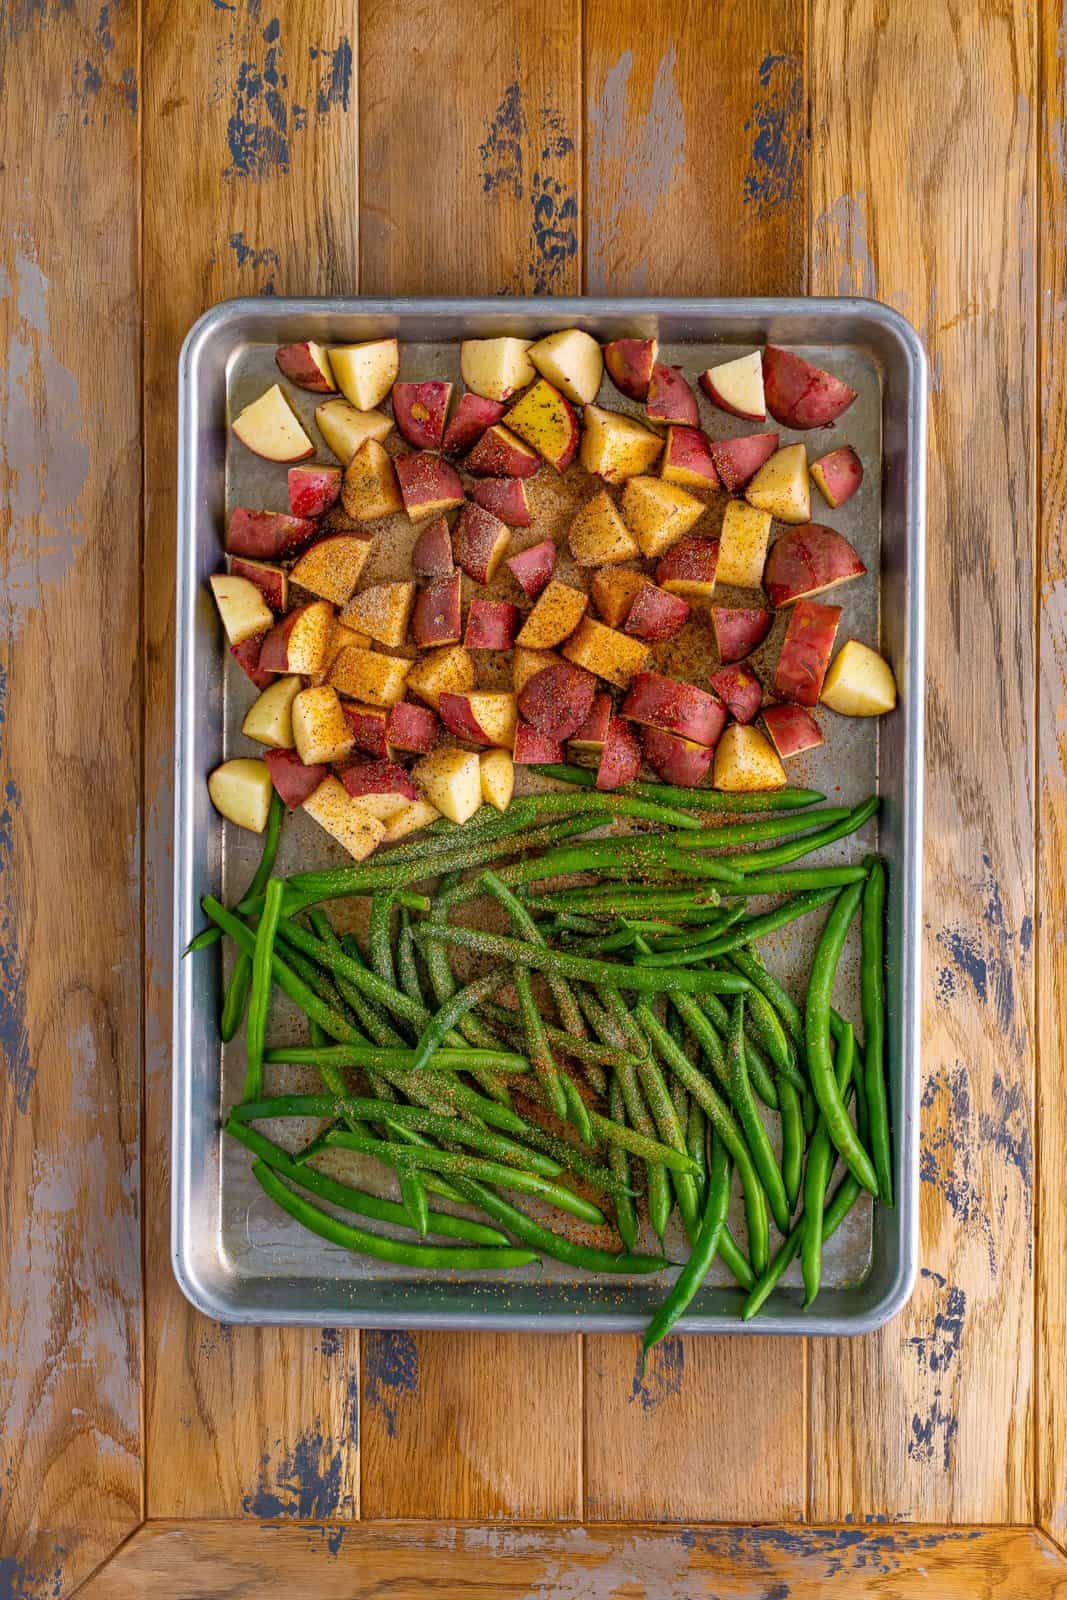 Sheet pan with green beans, potatoes, and herbs and spices. 